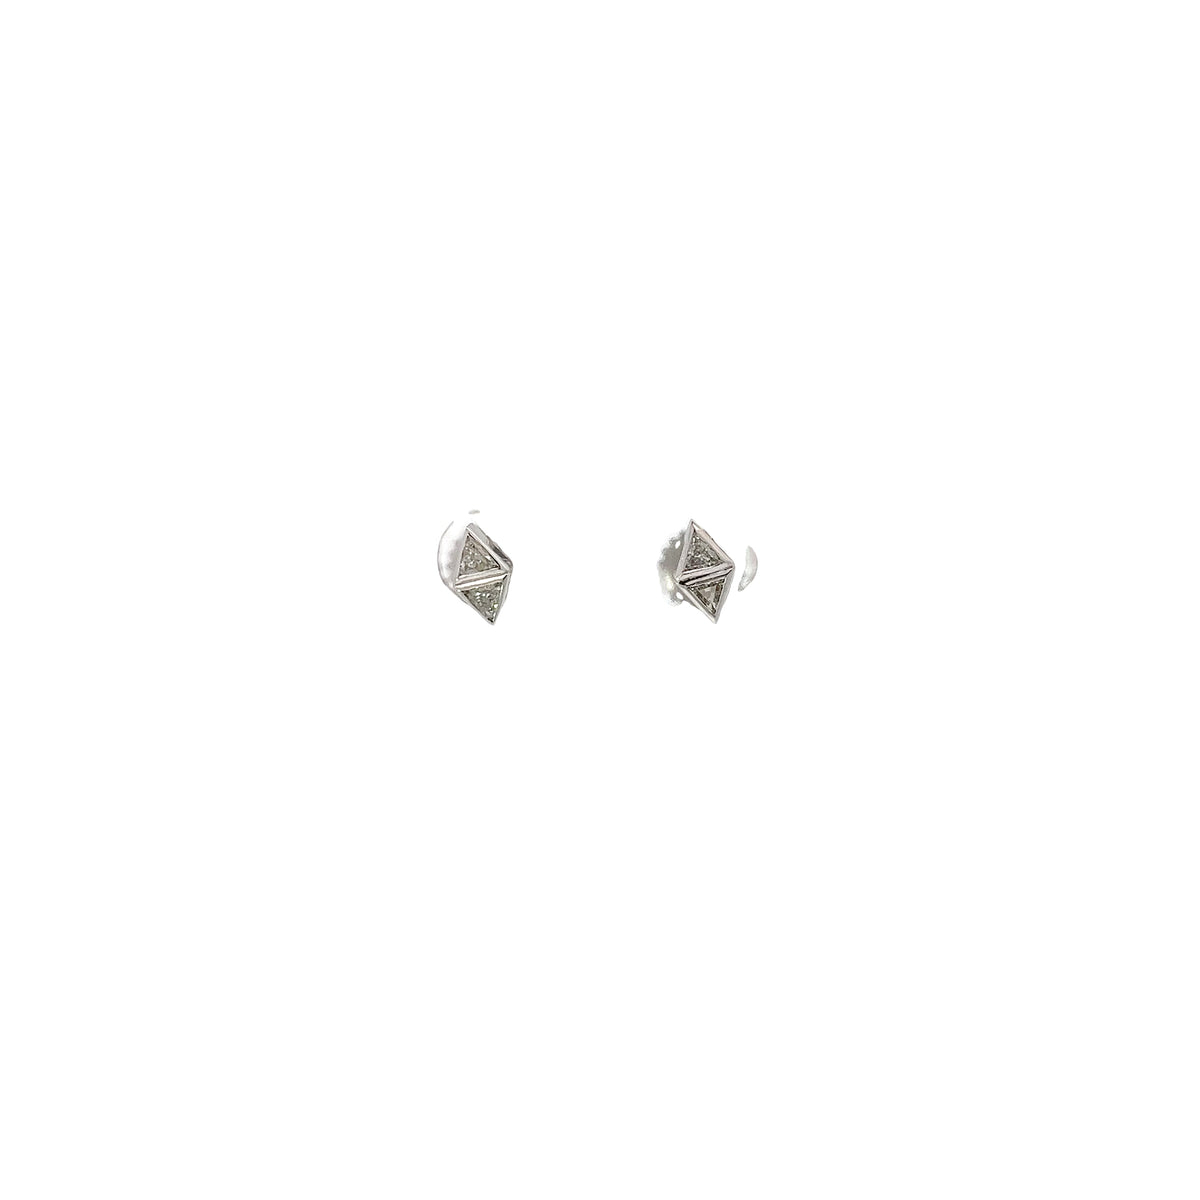 14k yellow and white gold Trillion shaped Diamond Stud earrings